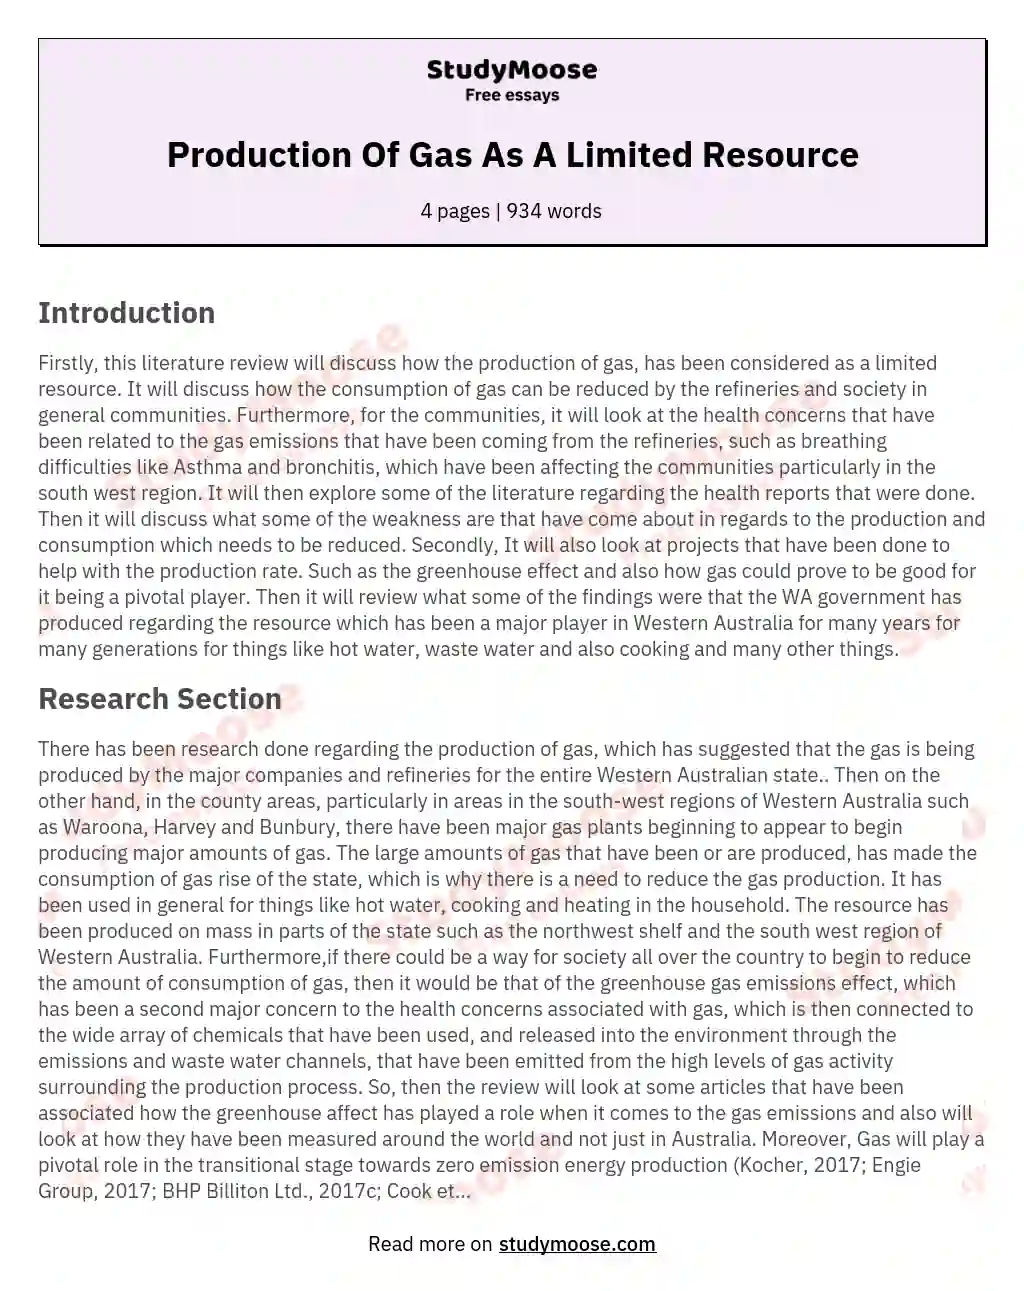 Production Of Gas As A Limited Resource essay